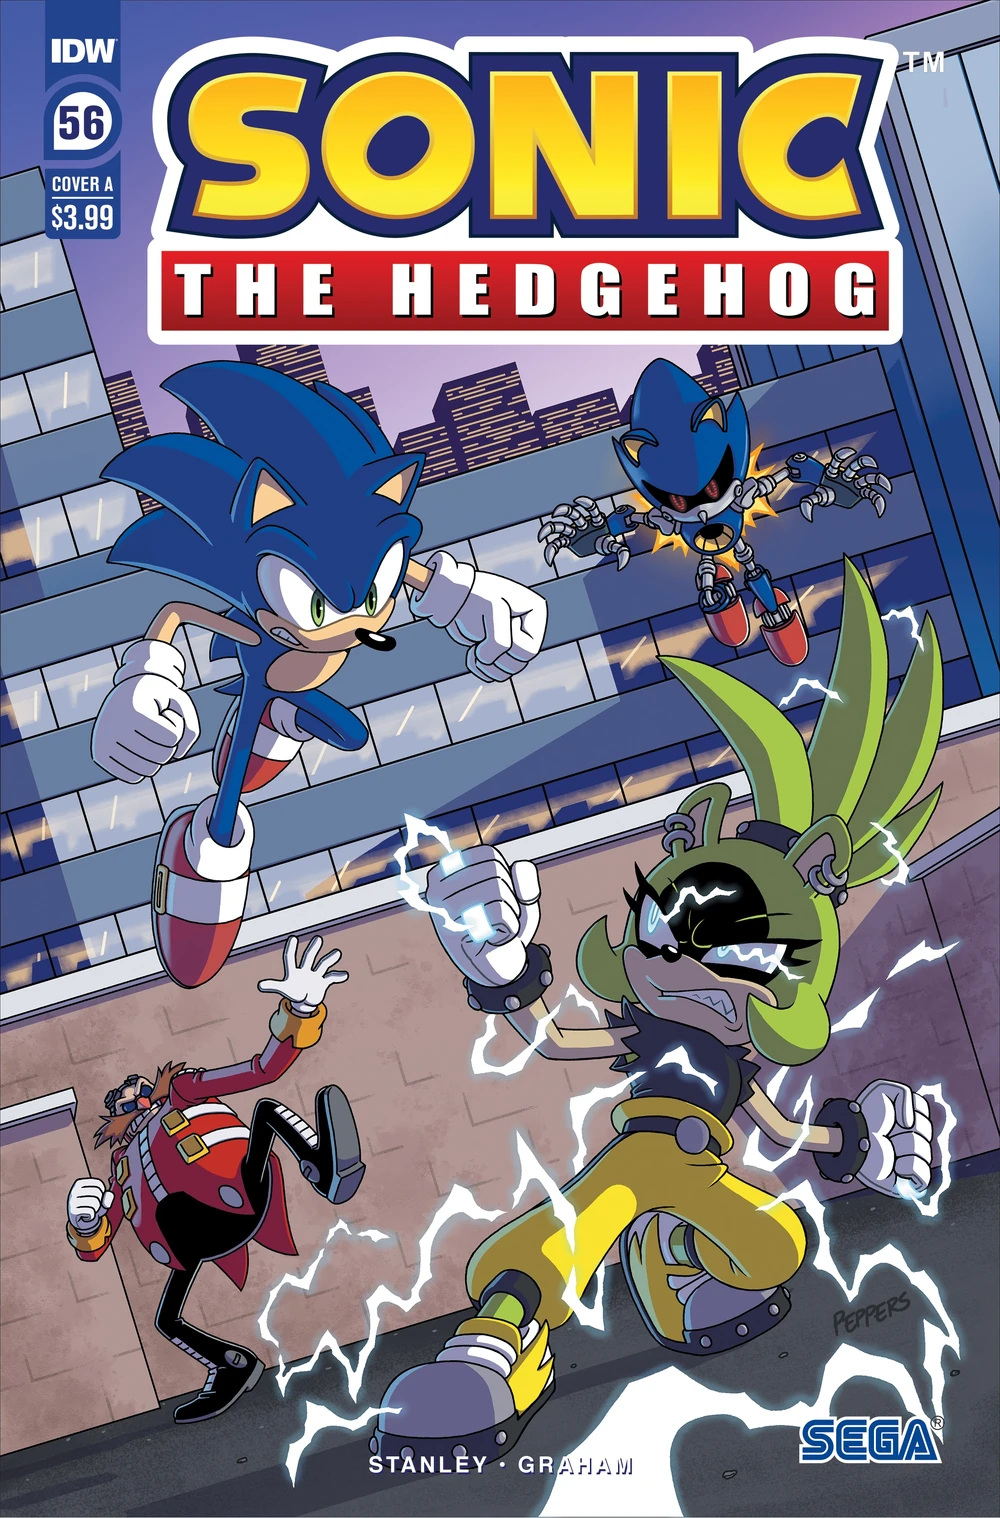 Sonic The Hedgehog #56 Cover A